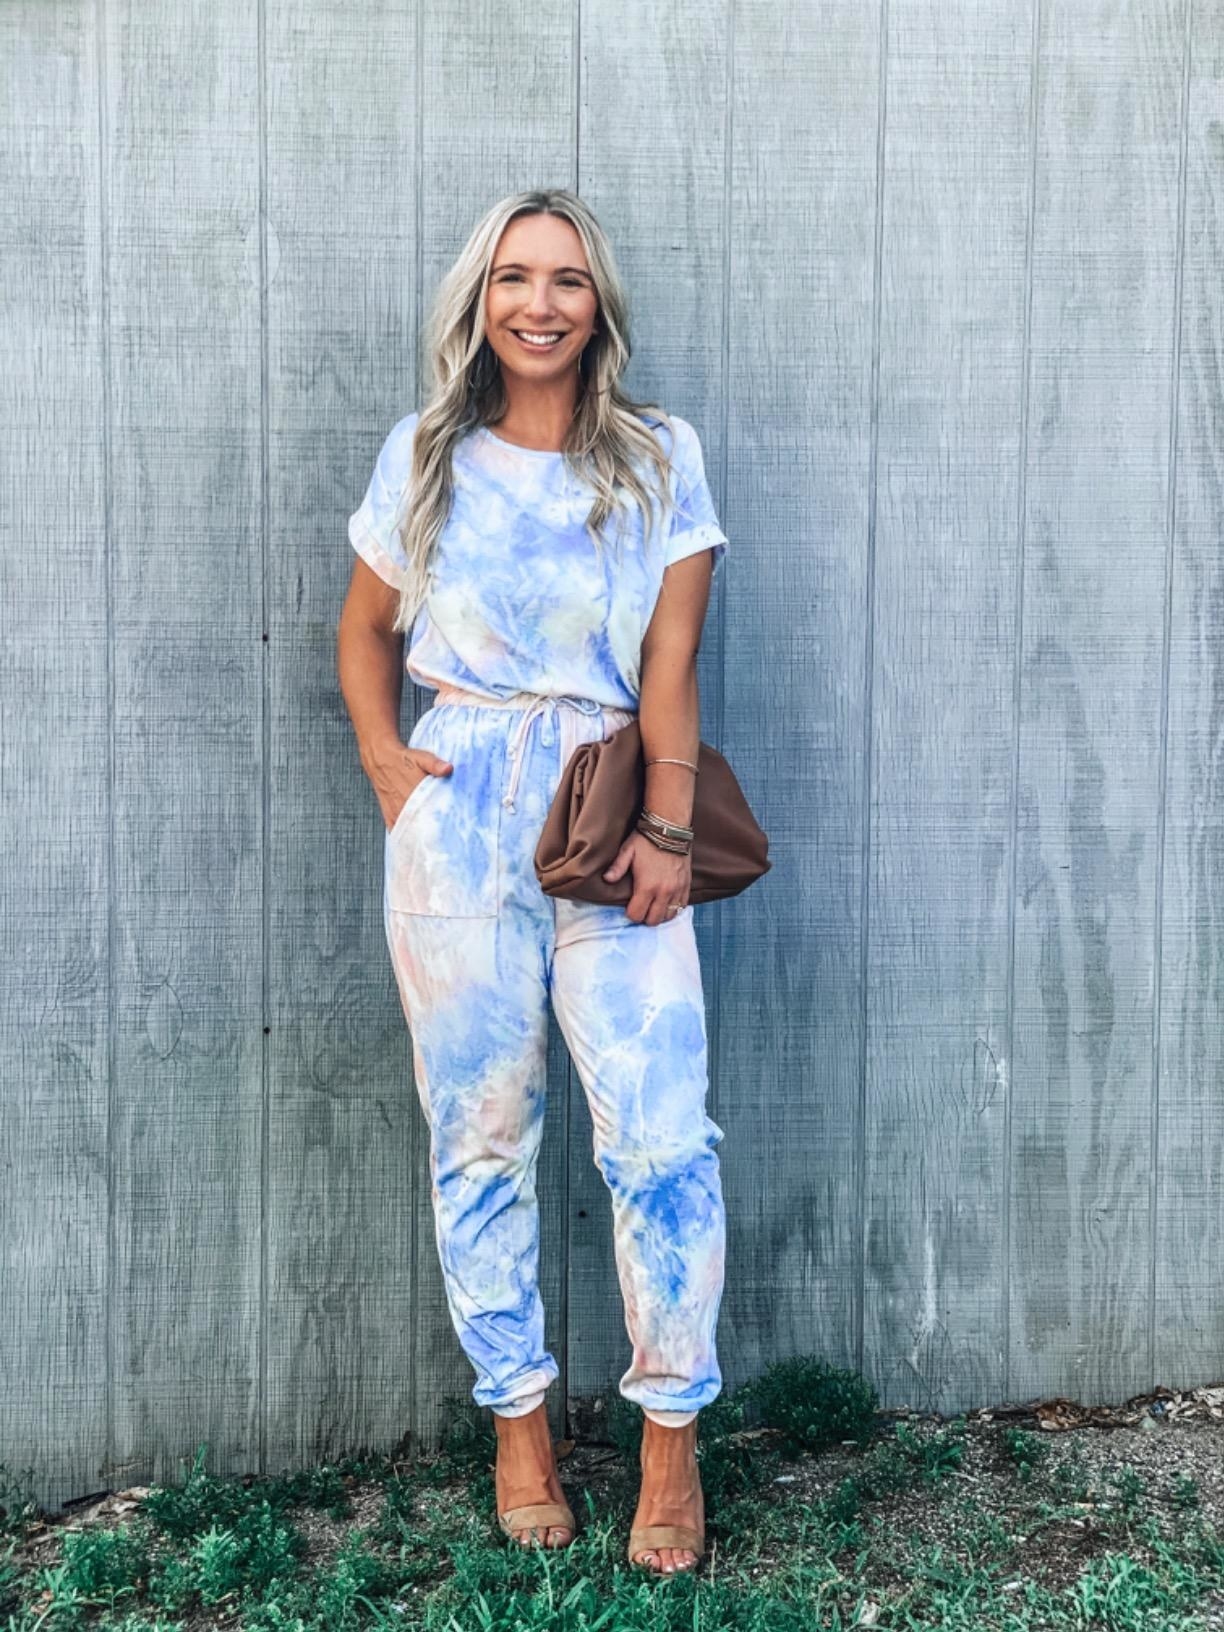 REVIEWS: Comfy, Easy to Wear Summer Items Under $30